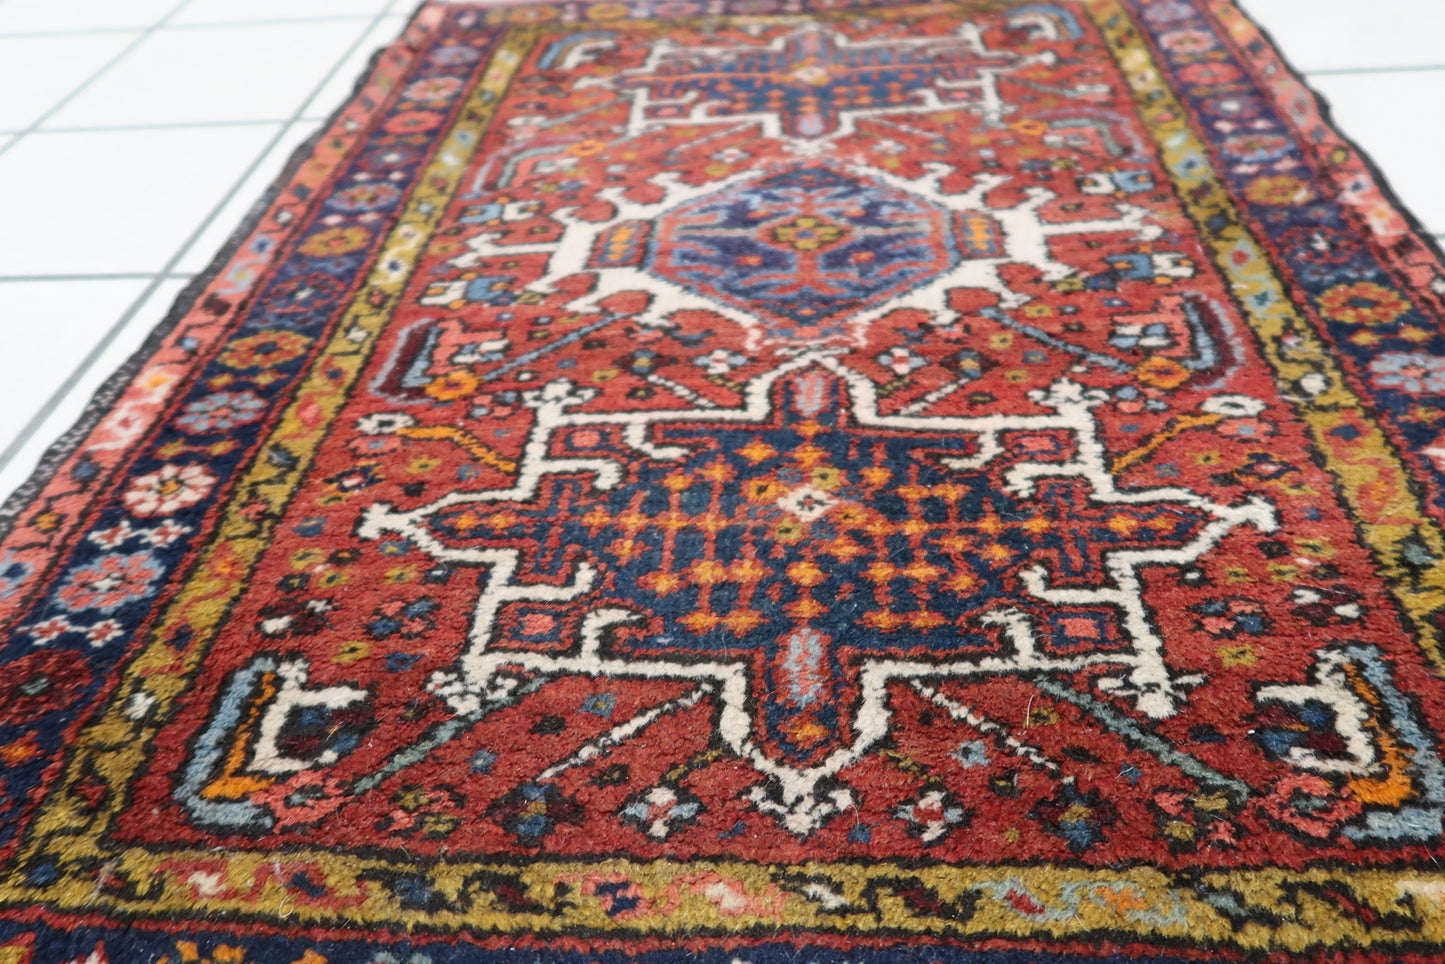 Close-up of the craftsmanship and fine details on the Handmade Antique Persian Karajeh Rug